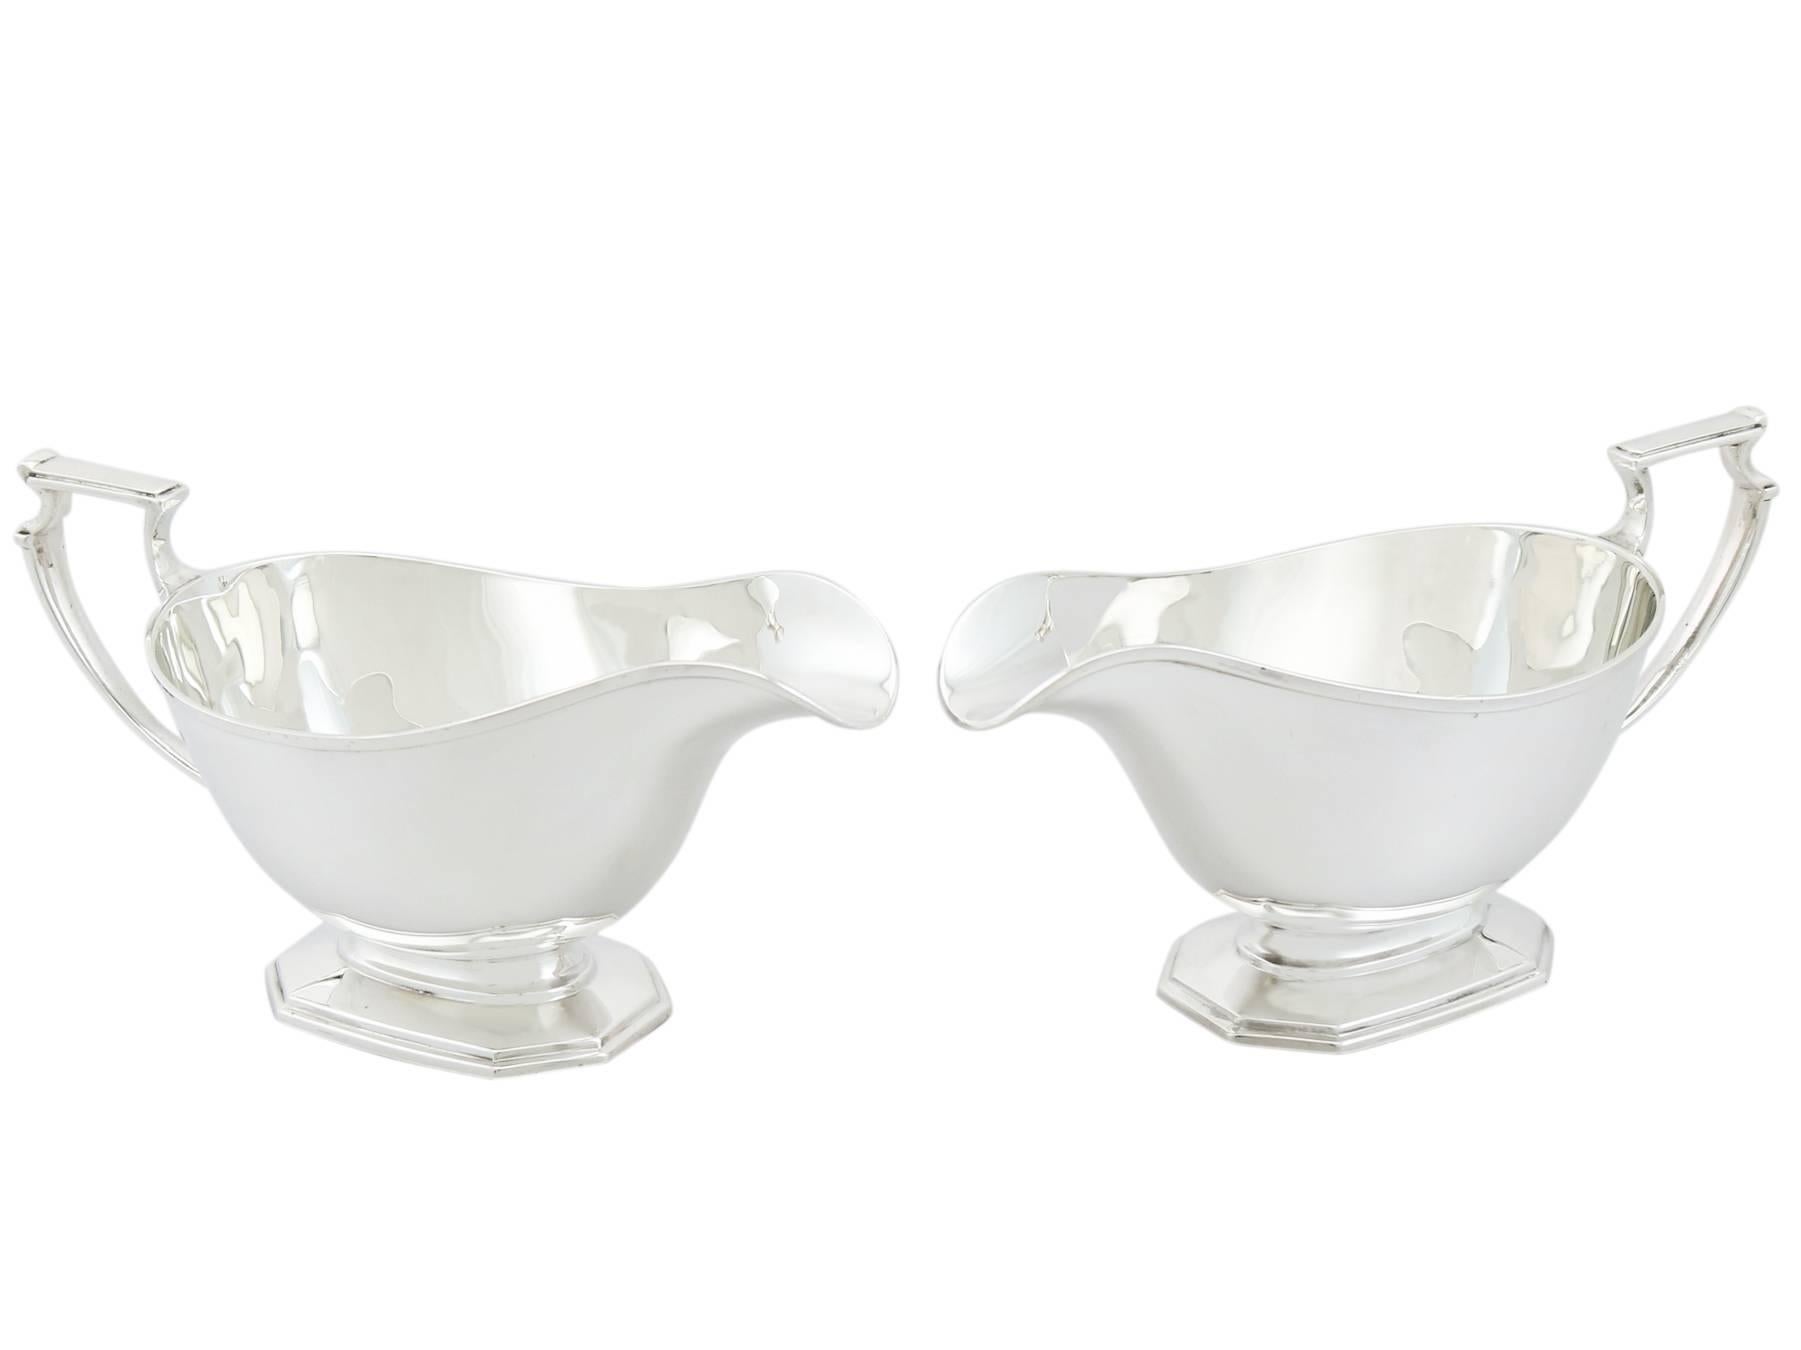 An exceptional, fine and impressive pair of antique George V sterling silver sauceboats made in the Art Deco style; an addition to our dining silverware collection.

These exceptional antique George V sterling silver sauceboats have a plain